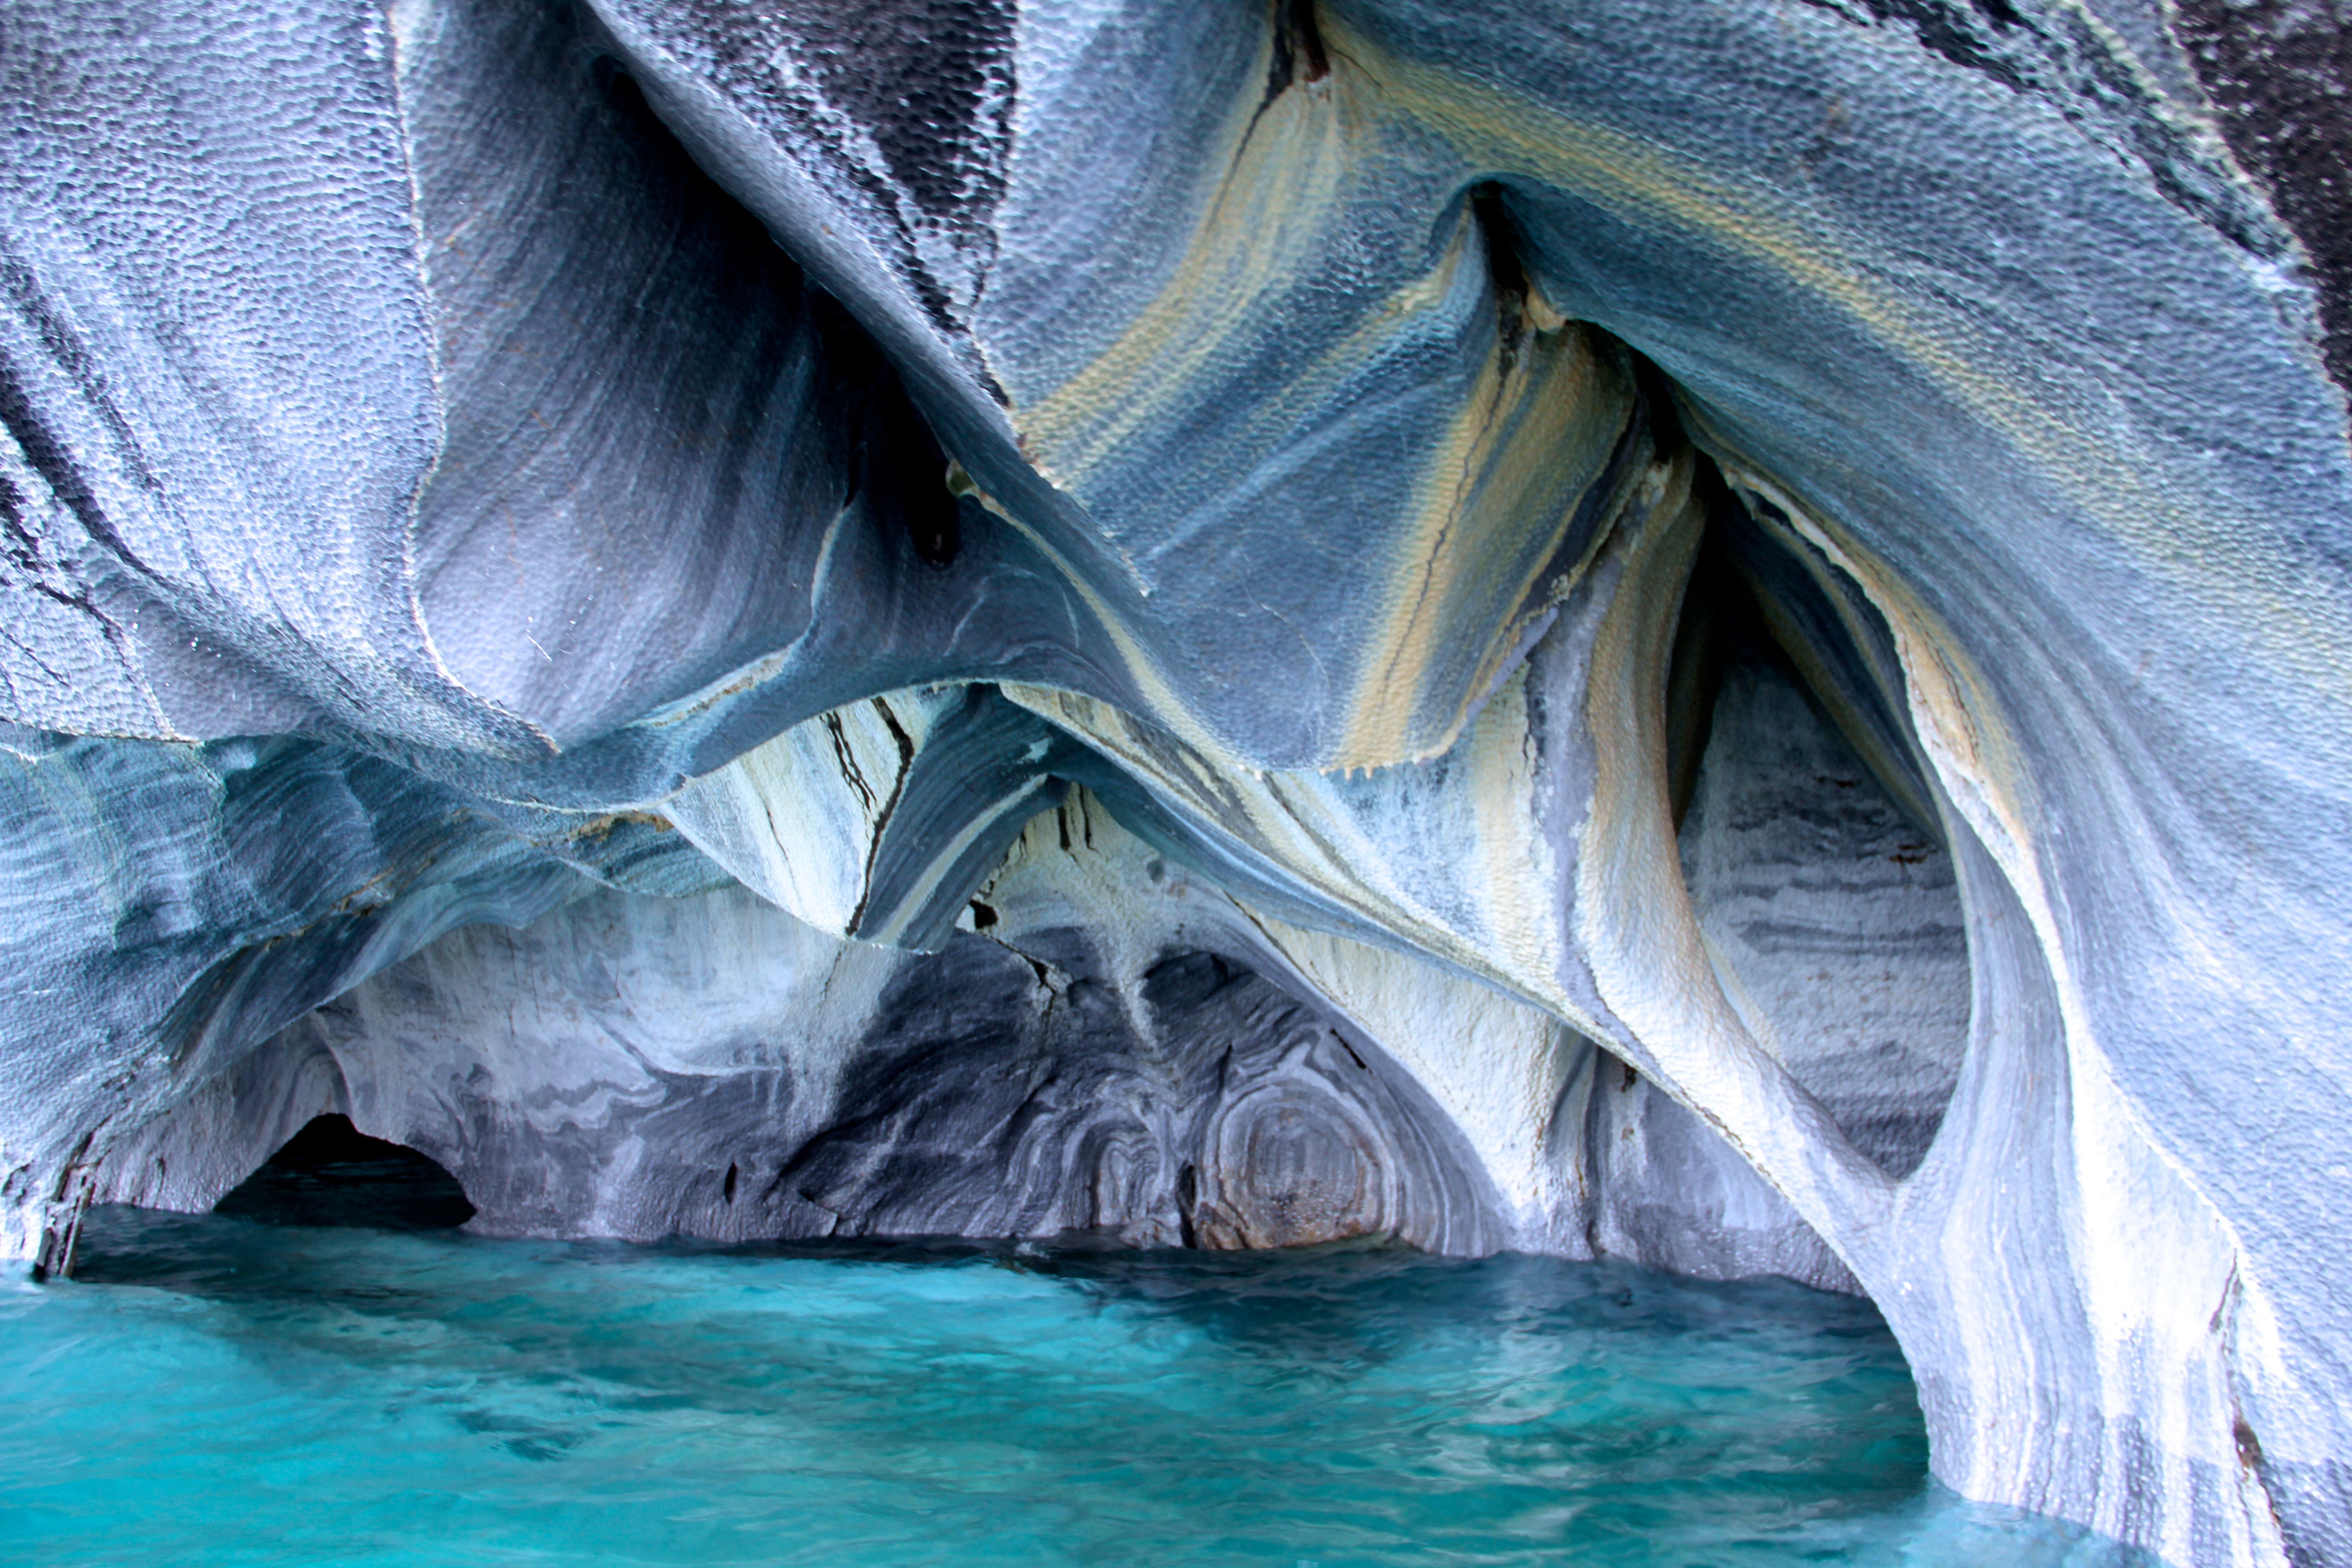 Marble Beautiful Caves In The World Travel Wallpaper Image